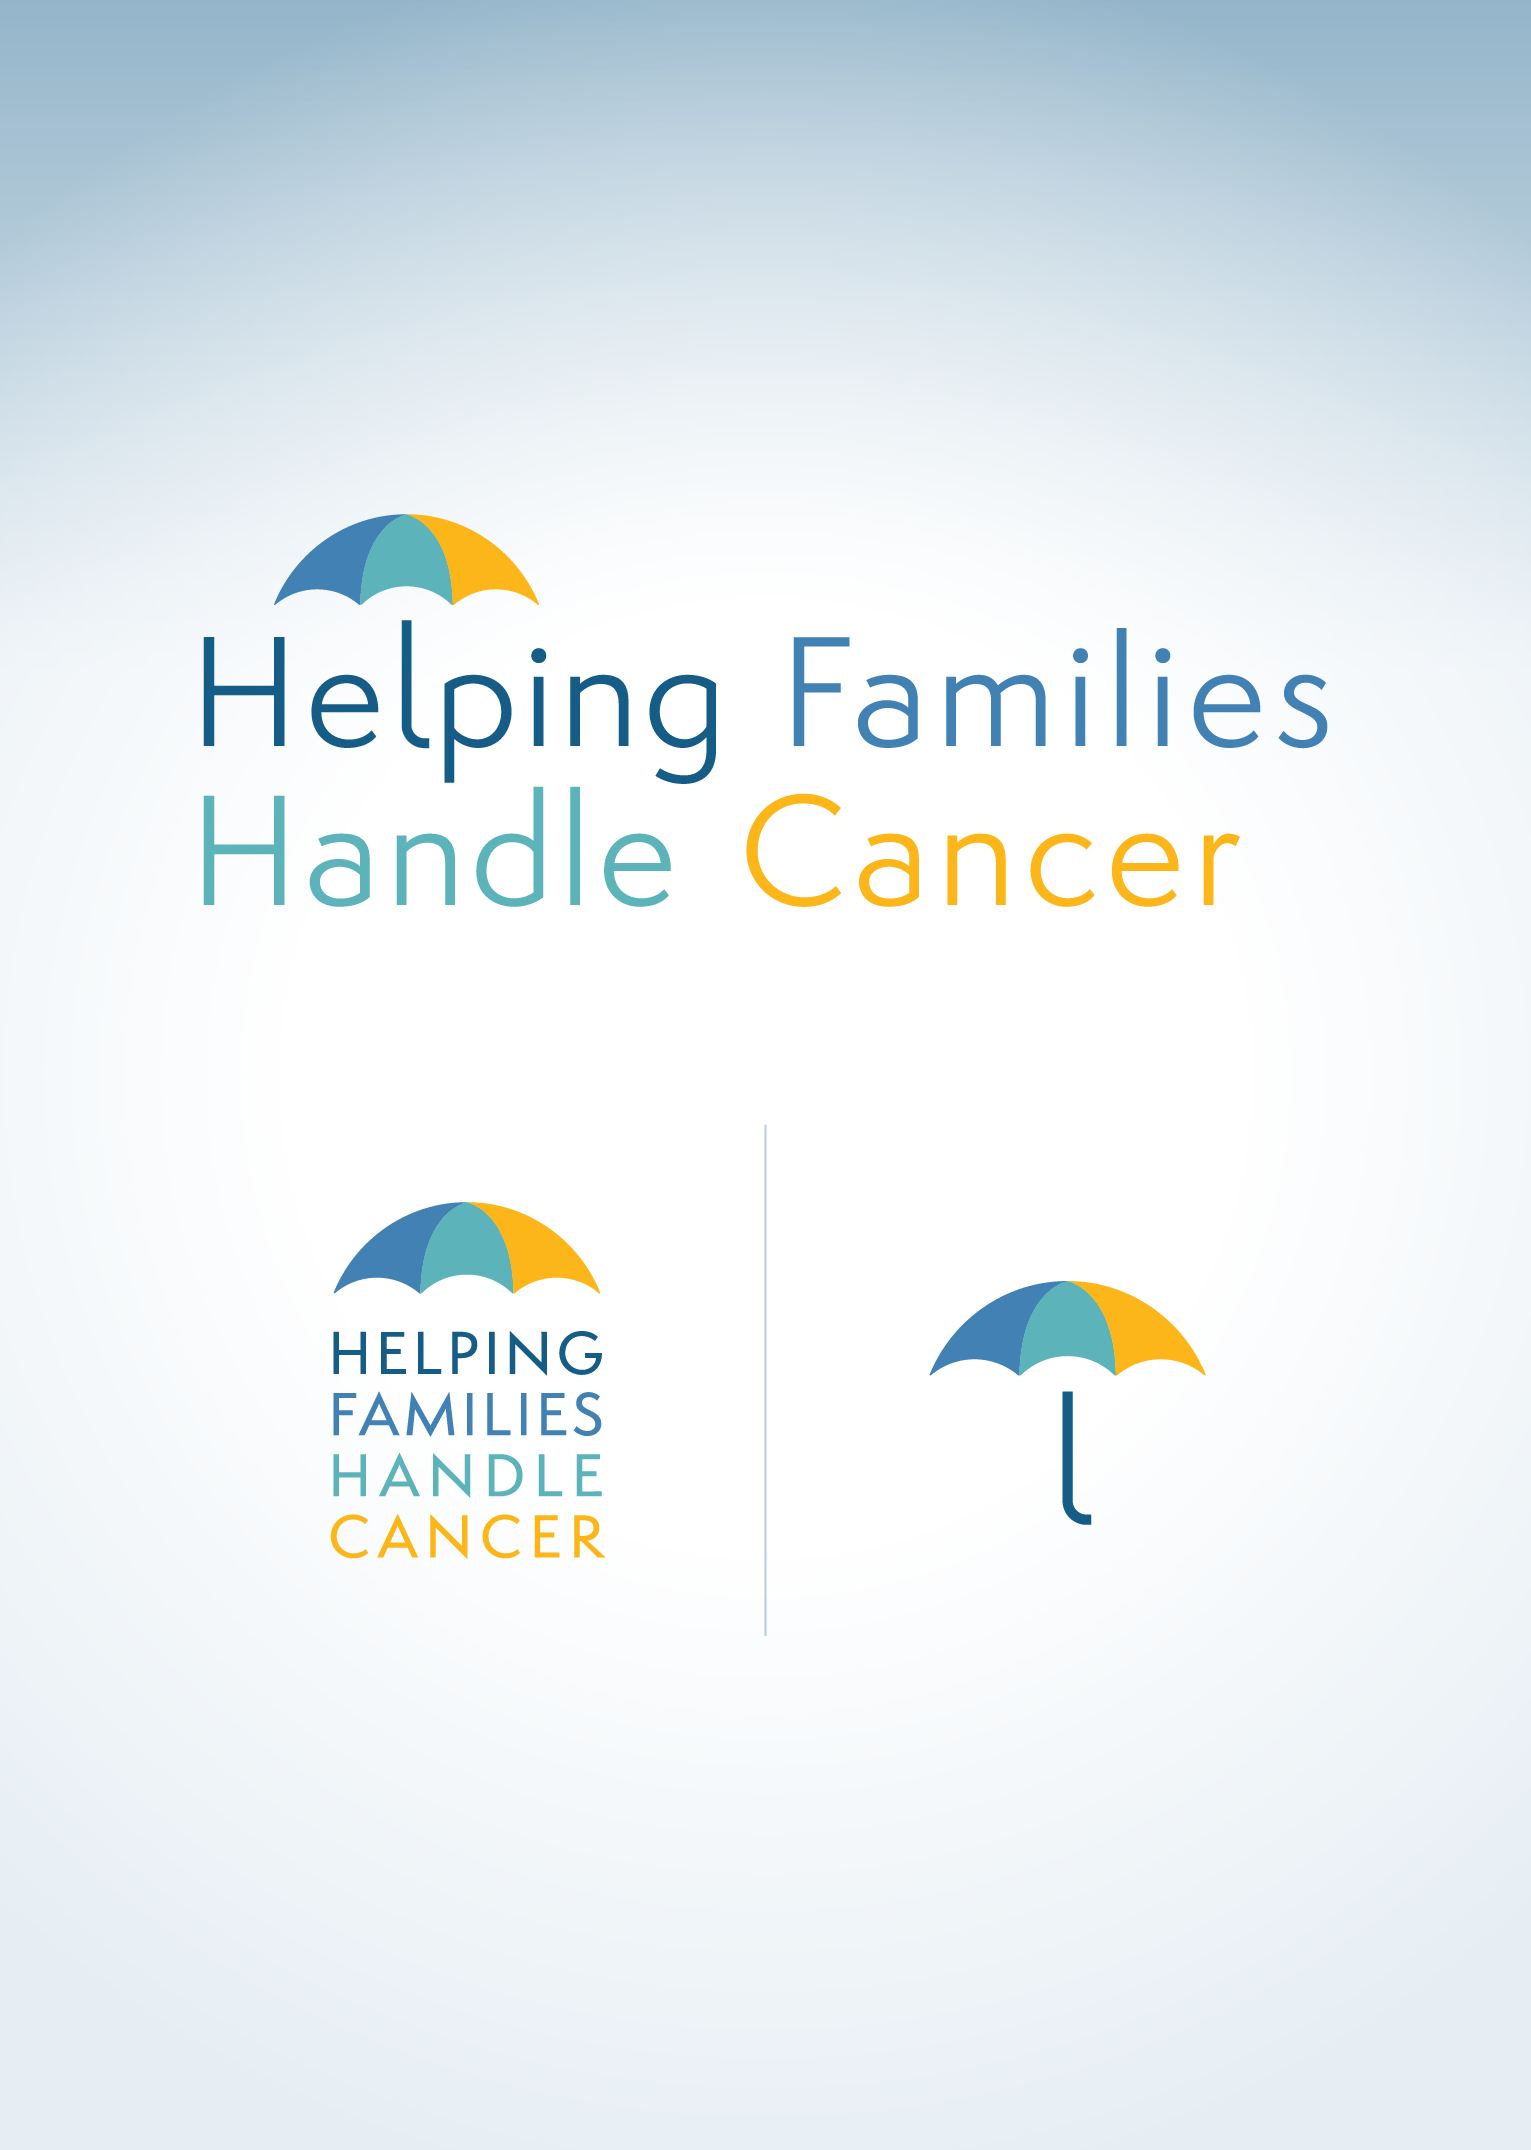 Helping Families Handle Cancer Branding